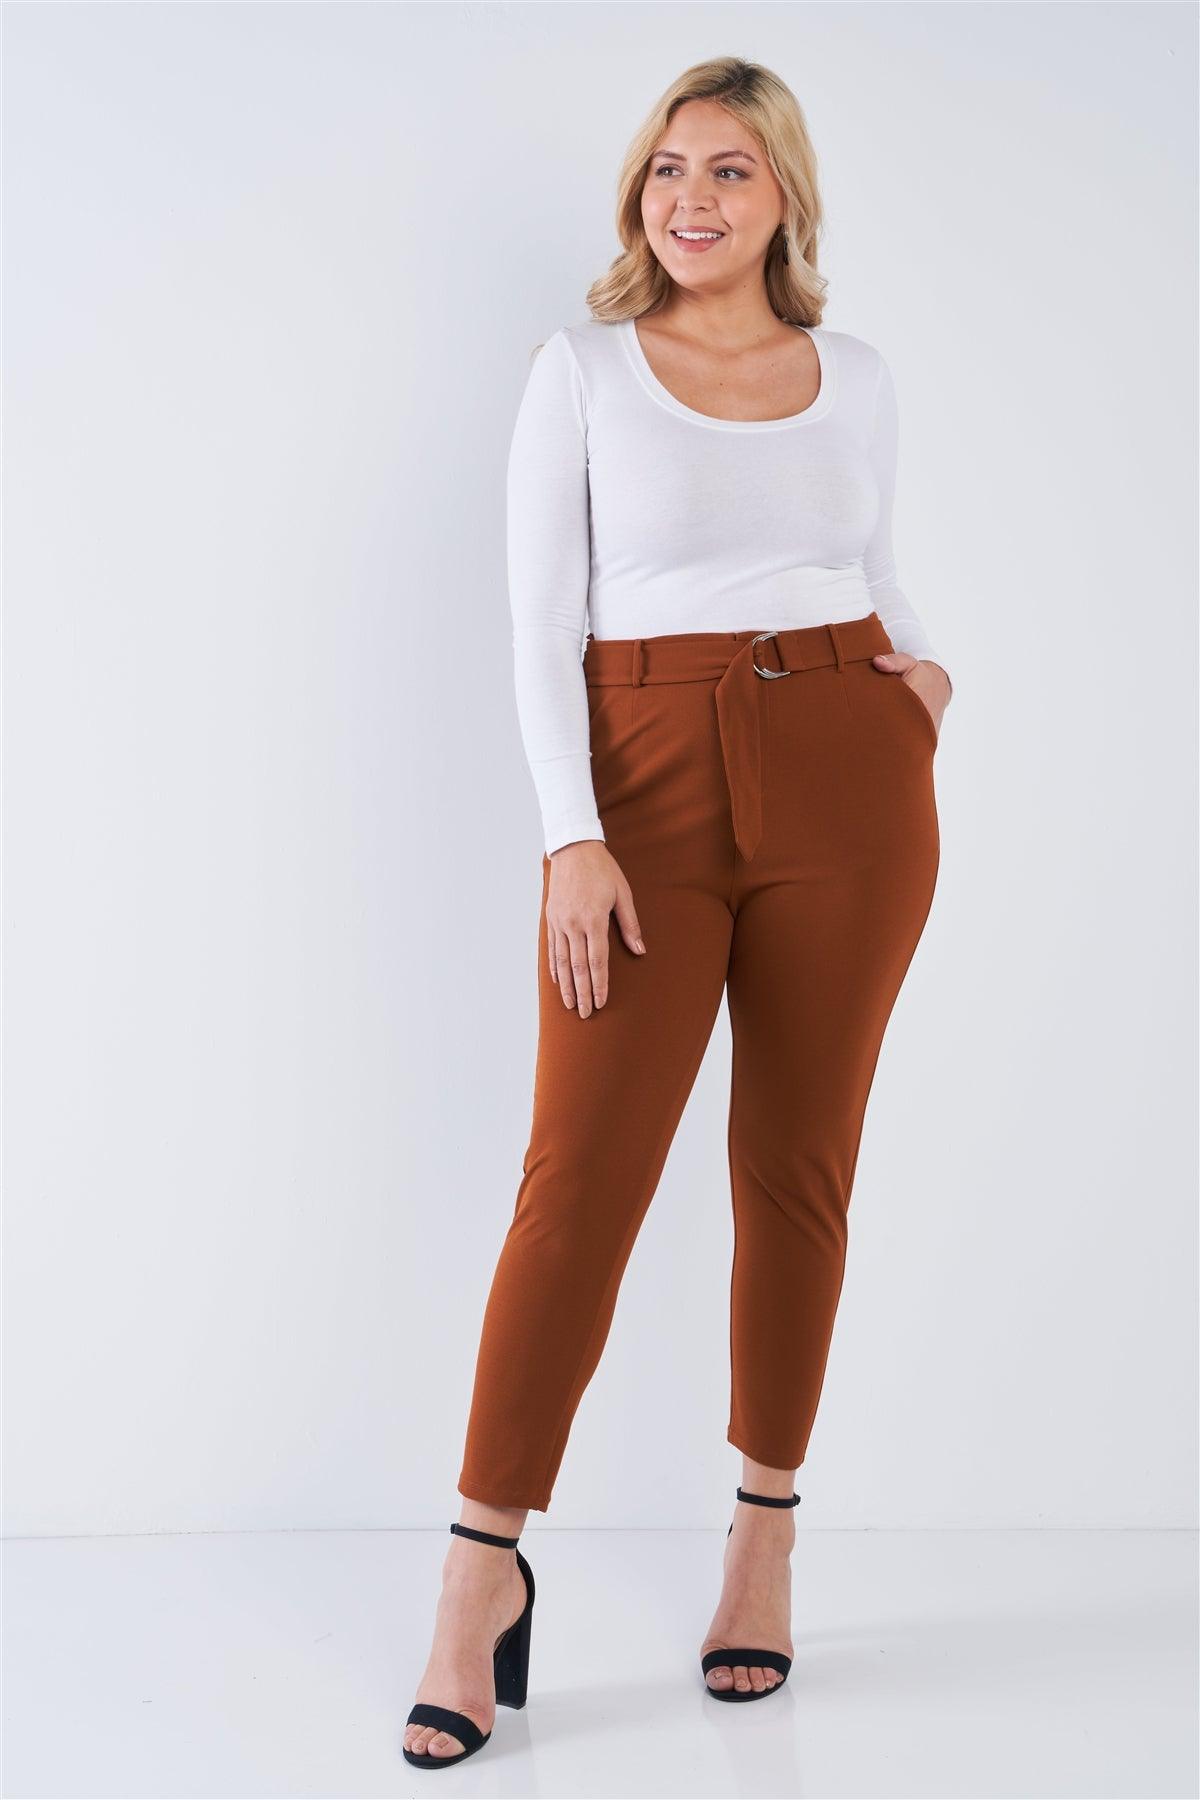 Junior Plus Size Ginger Bread High Waisted Ankle Length Pants /2-2-2